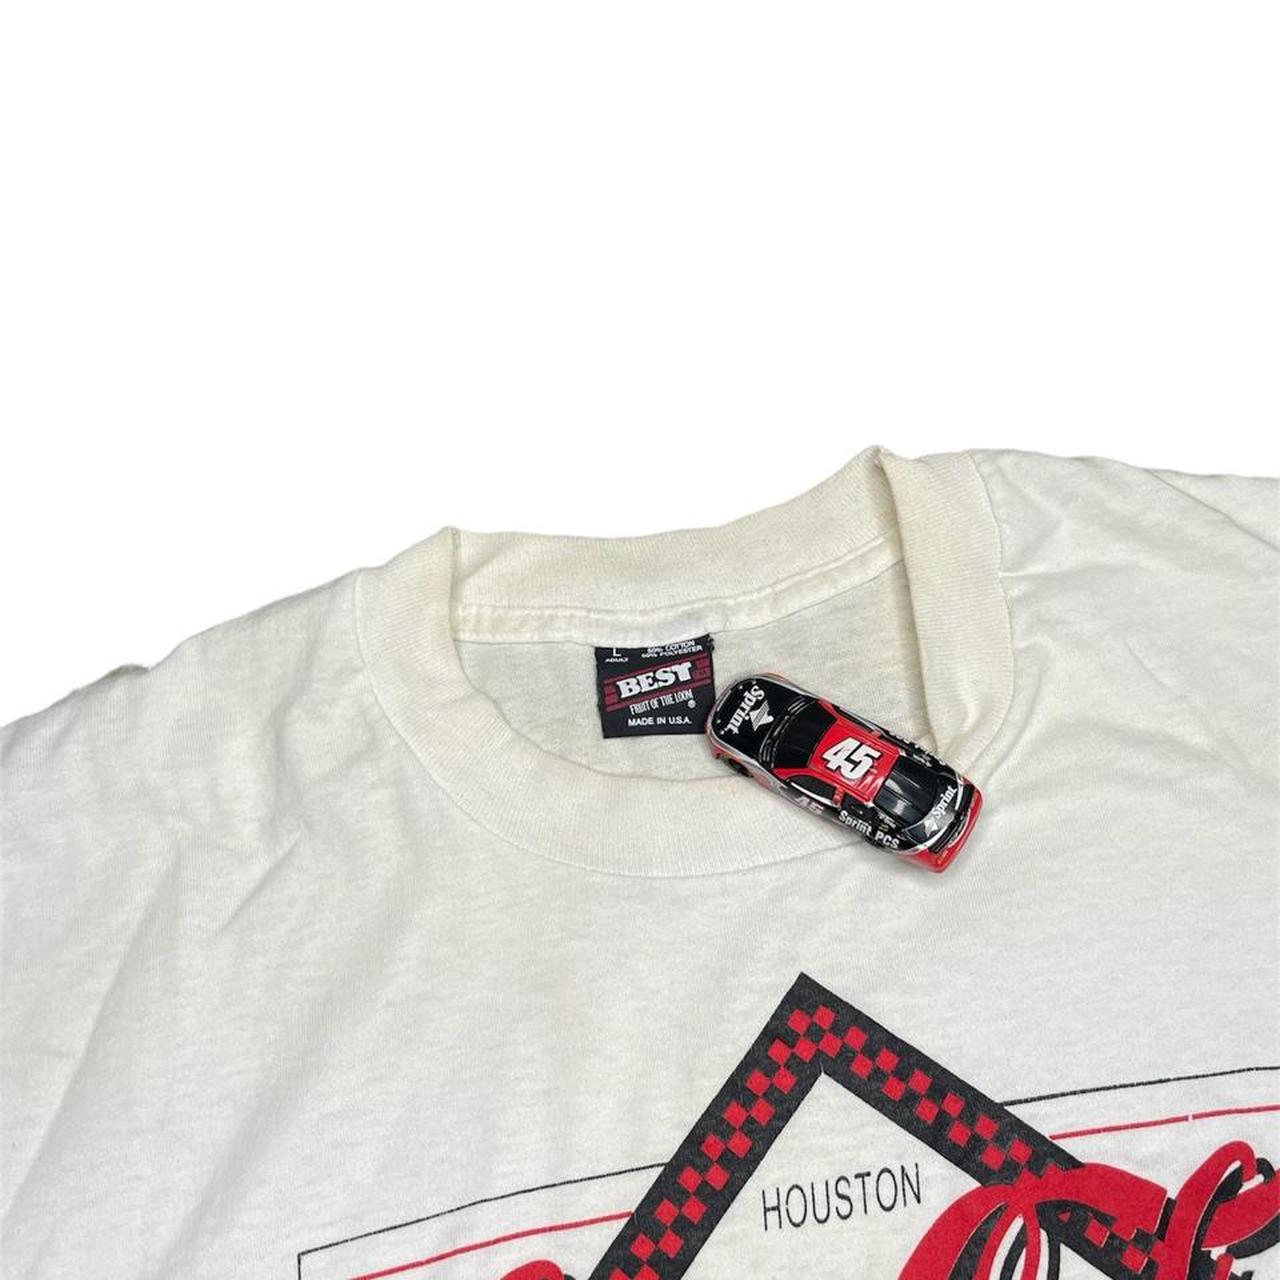 Coca-Cola Men's White and Red T-shirt (2)